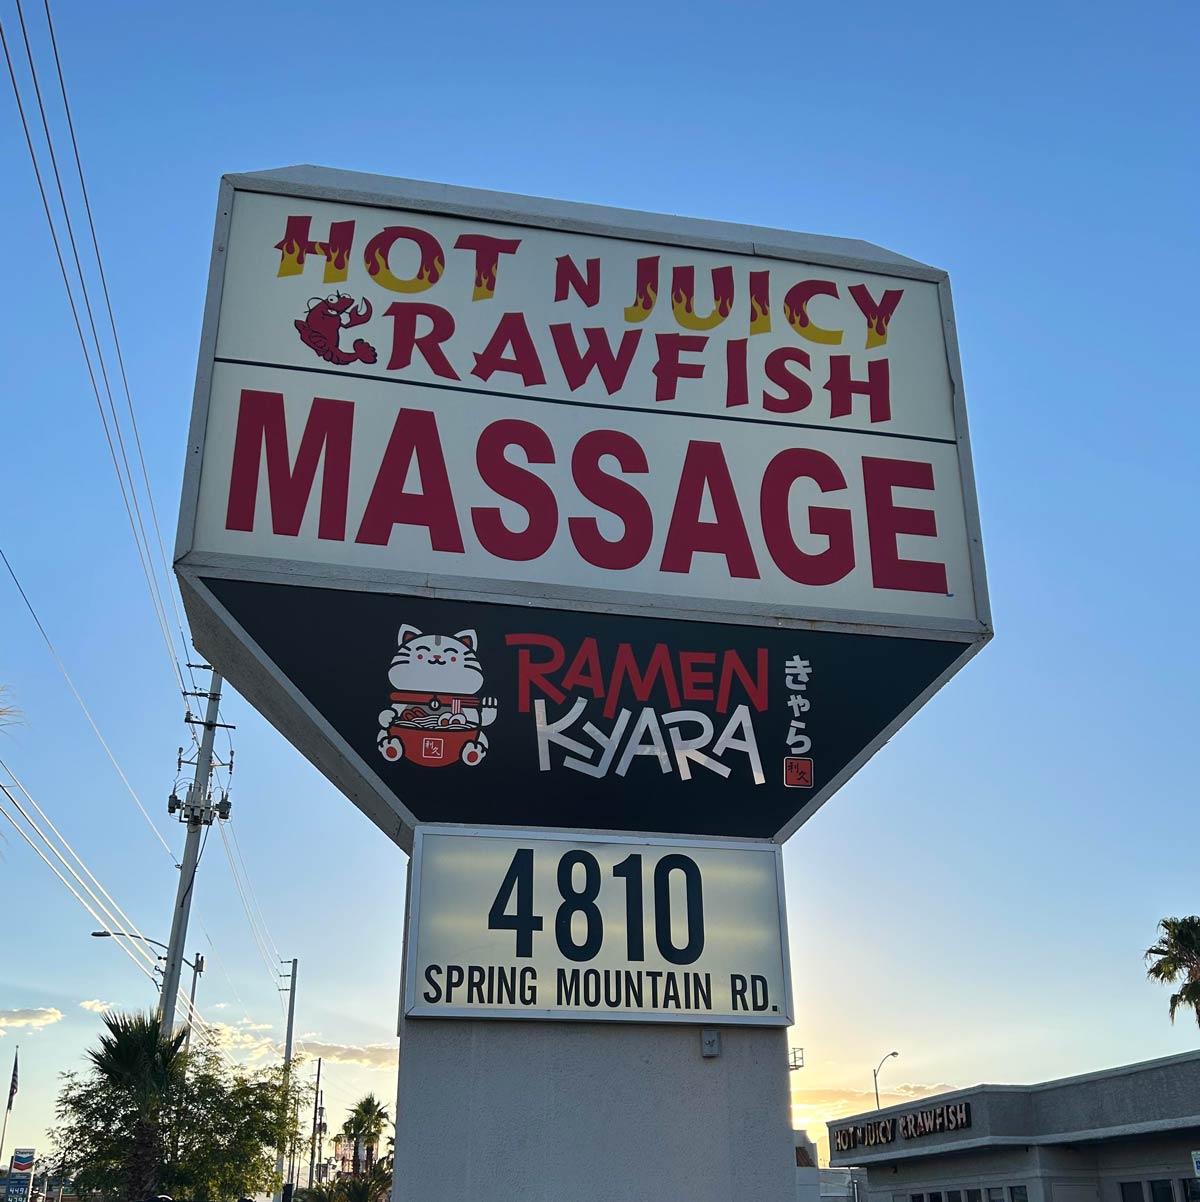 Massage trends are getting out of hand